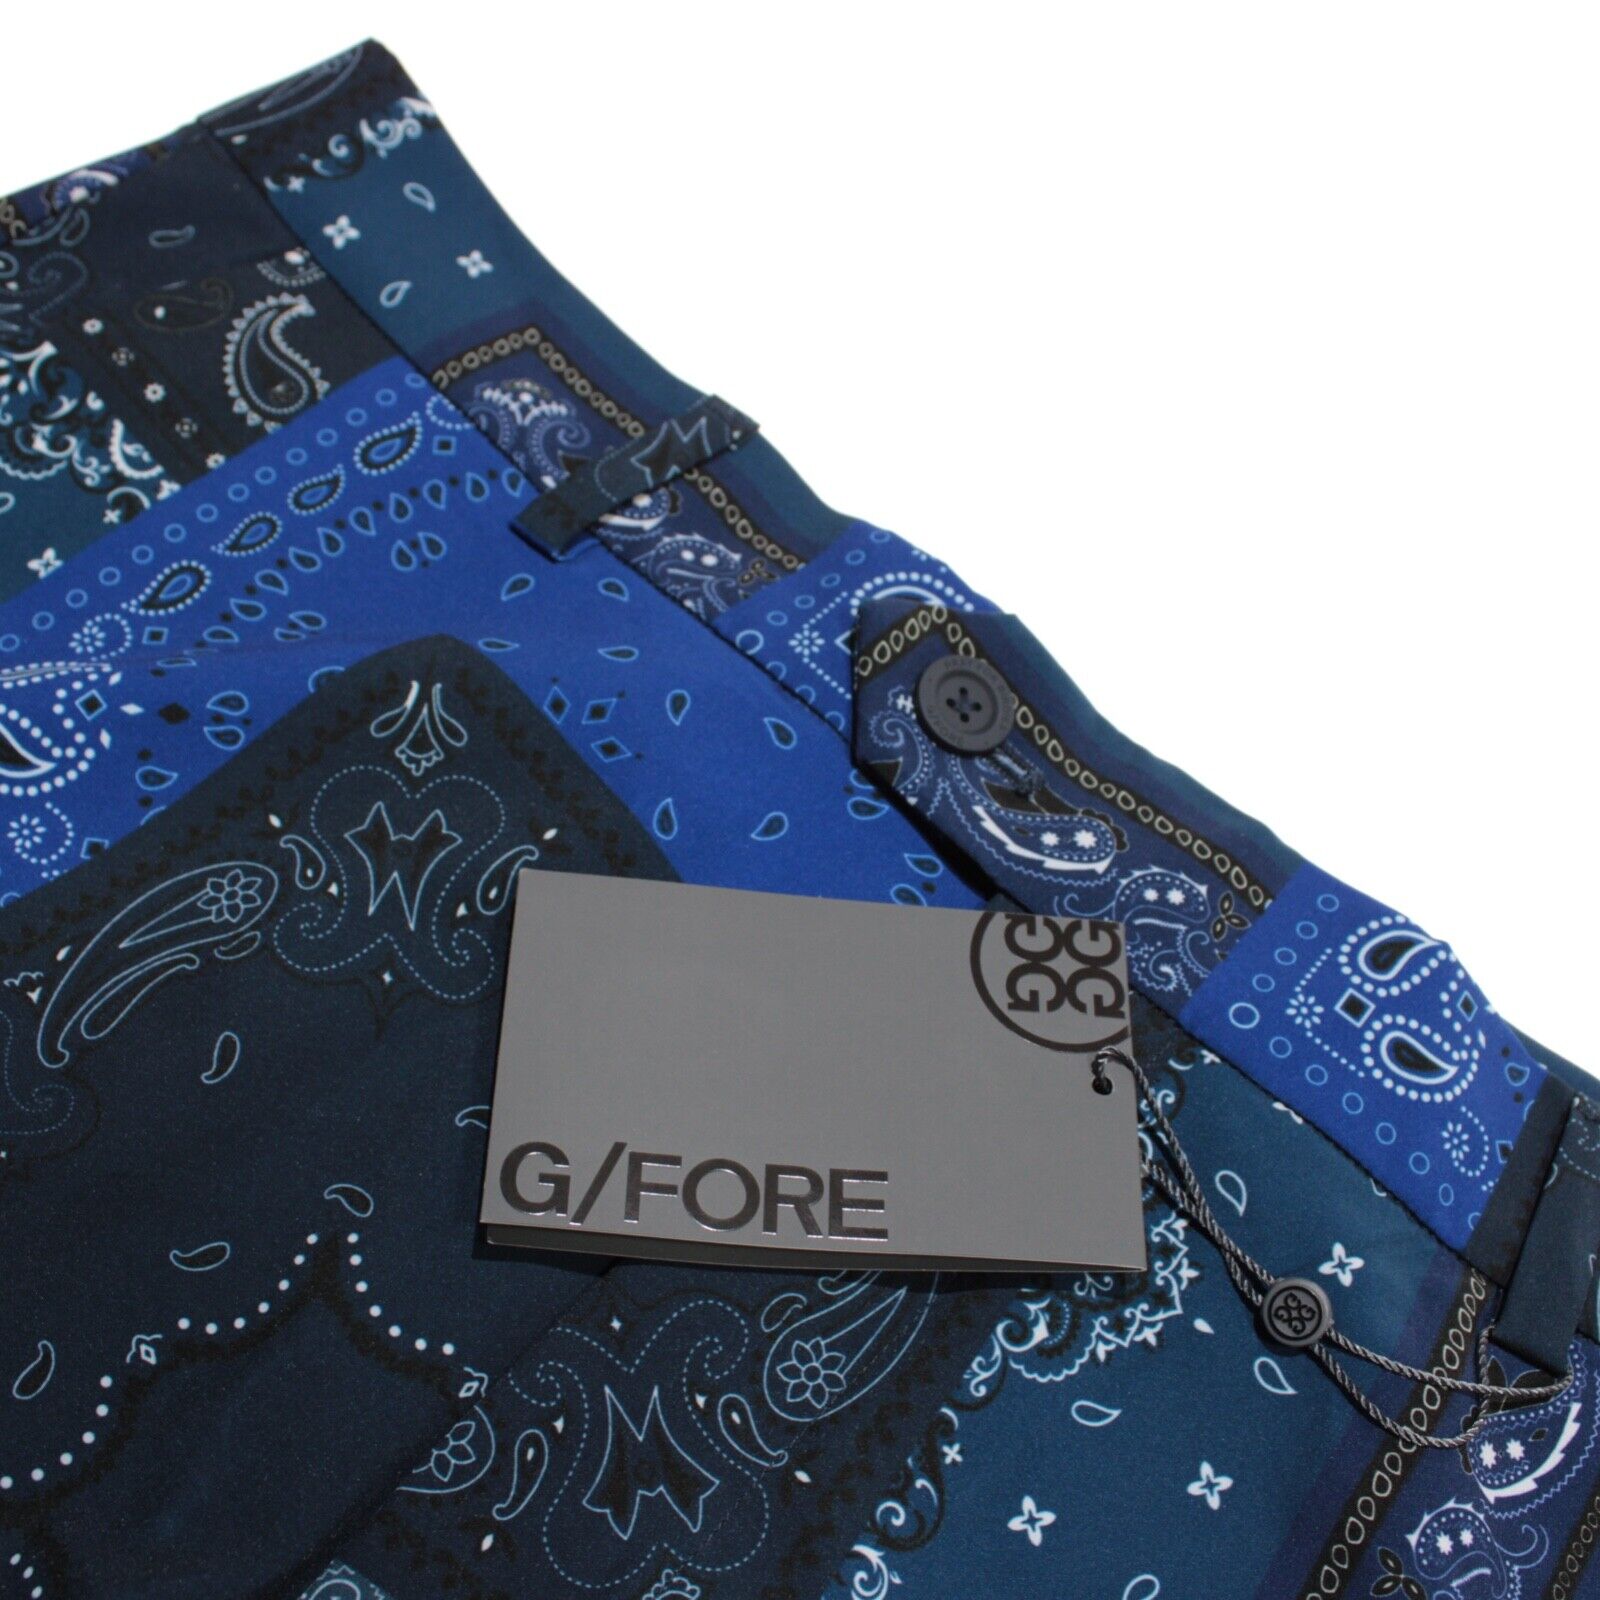 G/Fore NWT Golf Shorts Size 34 US In Blue Paisley Polyester Blend